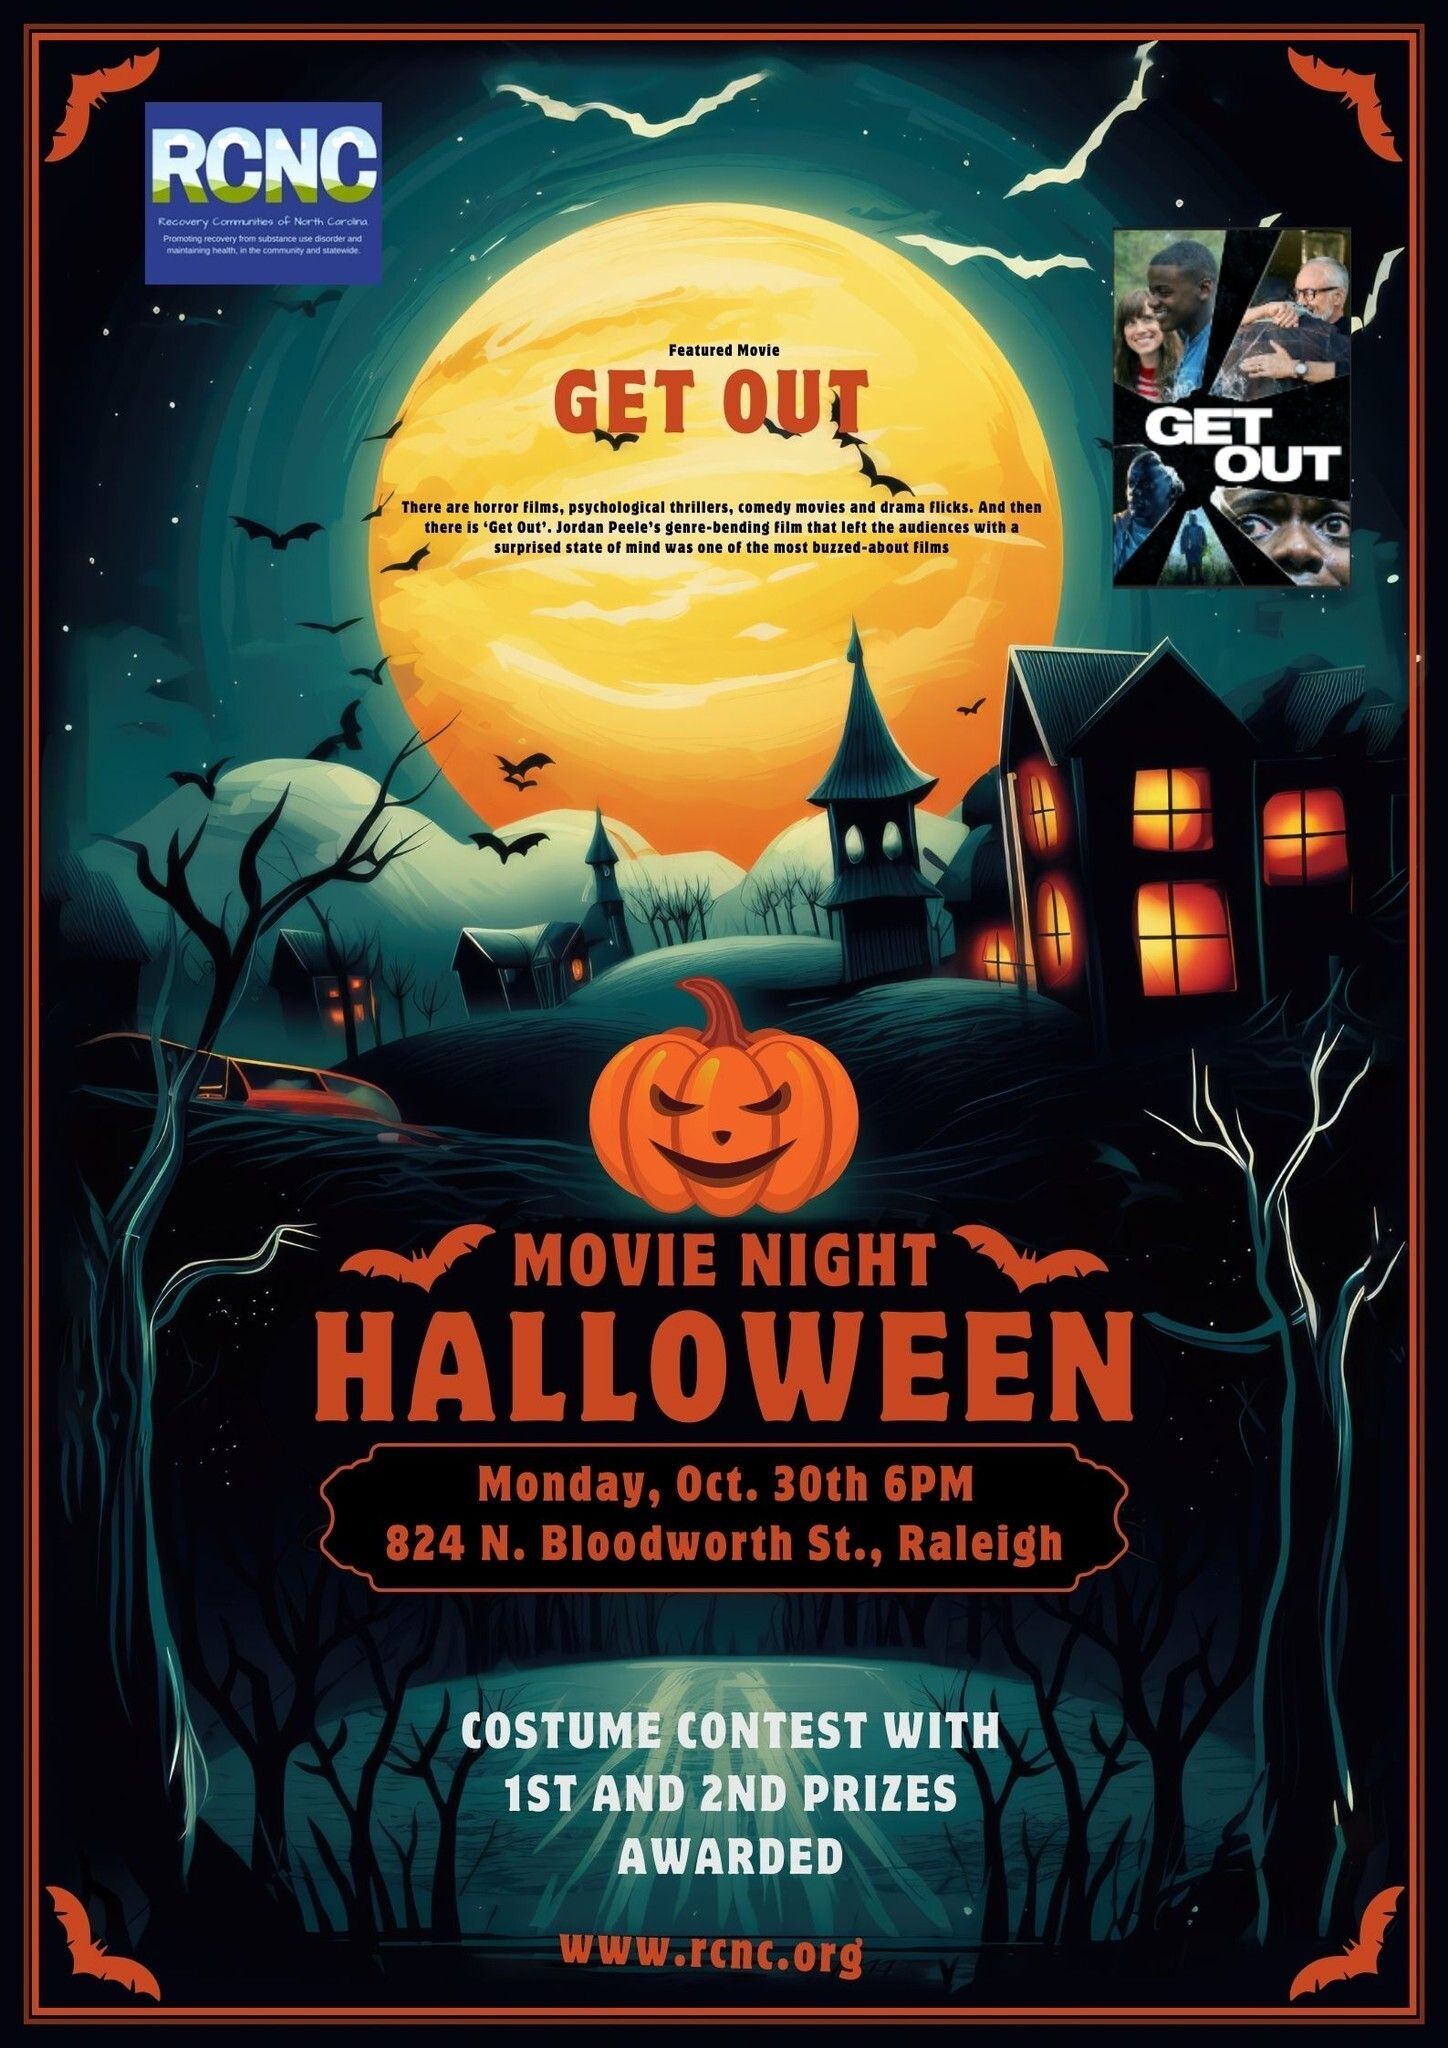 Get ready for a spooktacular Monday Movie night! October 30th at 6PM